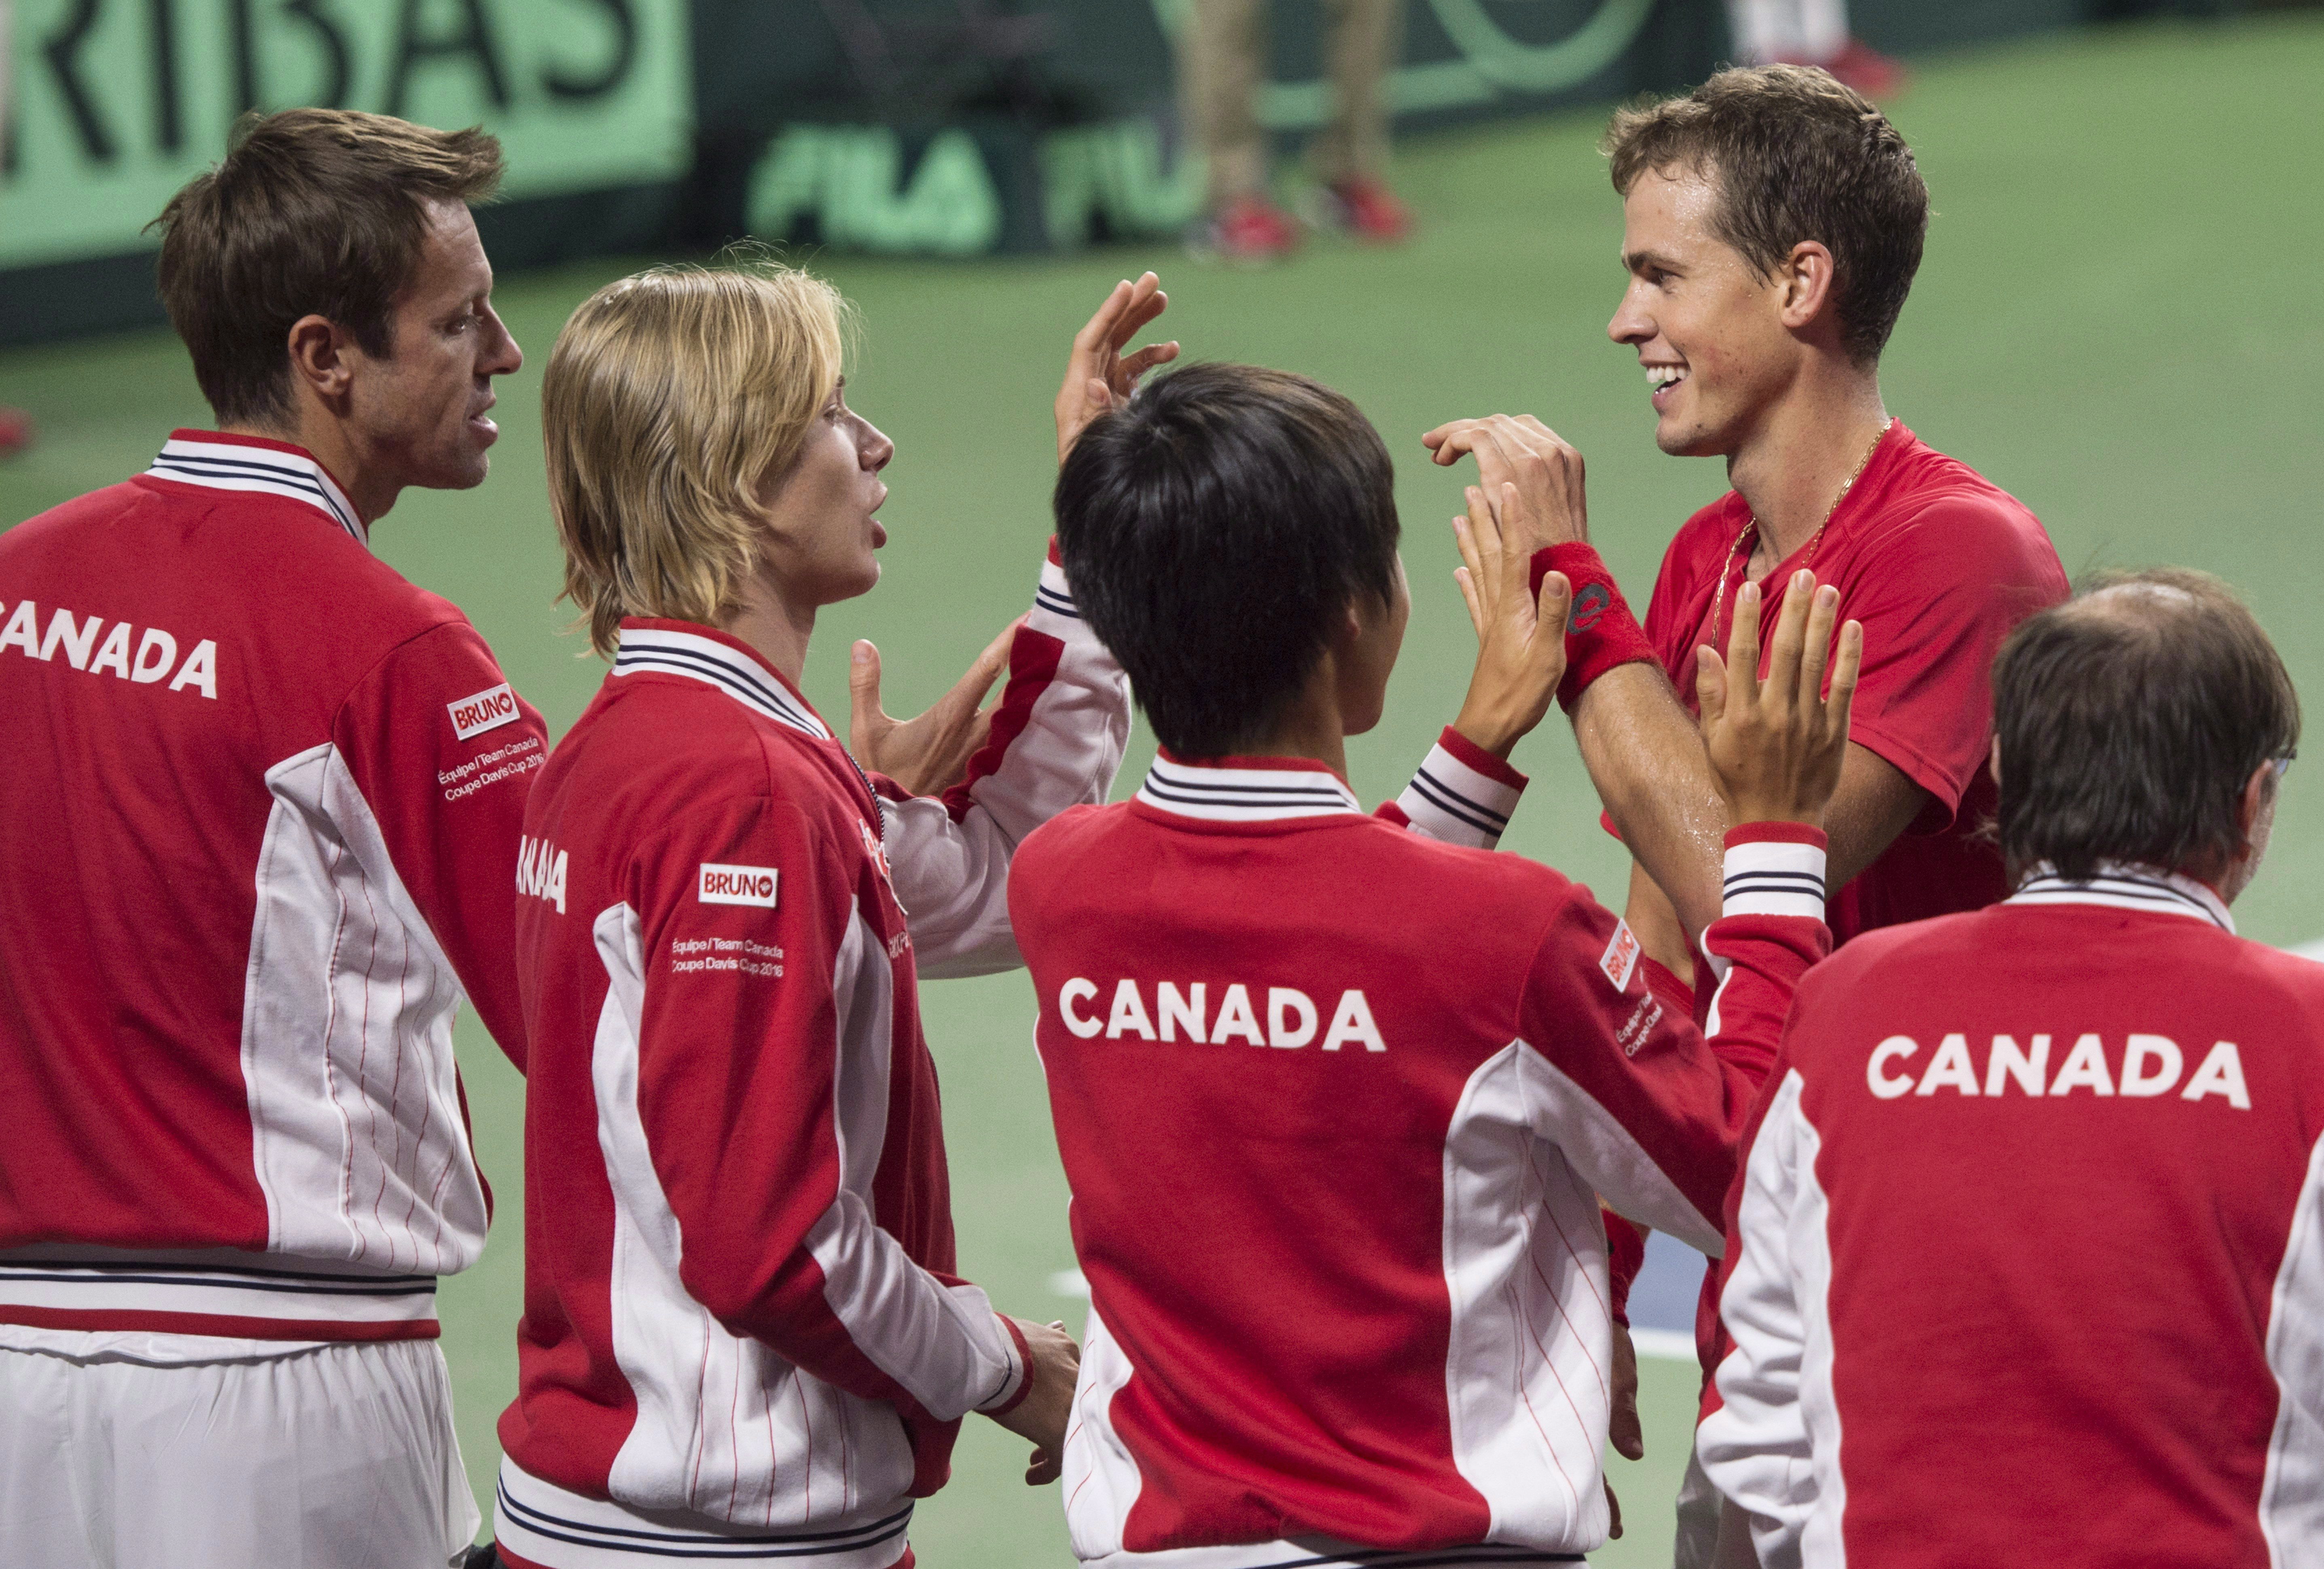 Canada's Vasek Pospisil, second from right, celebrates with teammates after defeating Chile's Nicolas Jarry in Davis Cup tennis World Group playoff singles action in Halifax on Friday, September 16, 2016. THE CANADIAN PRESS/Darren Calabrese